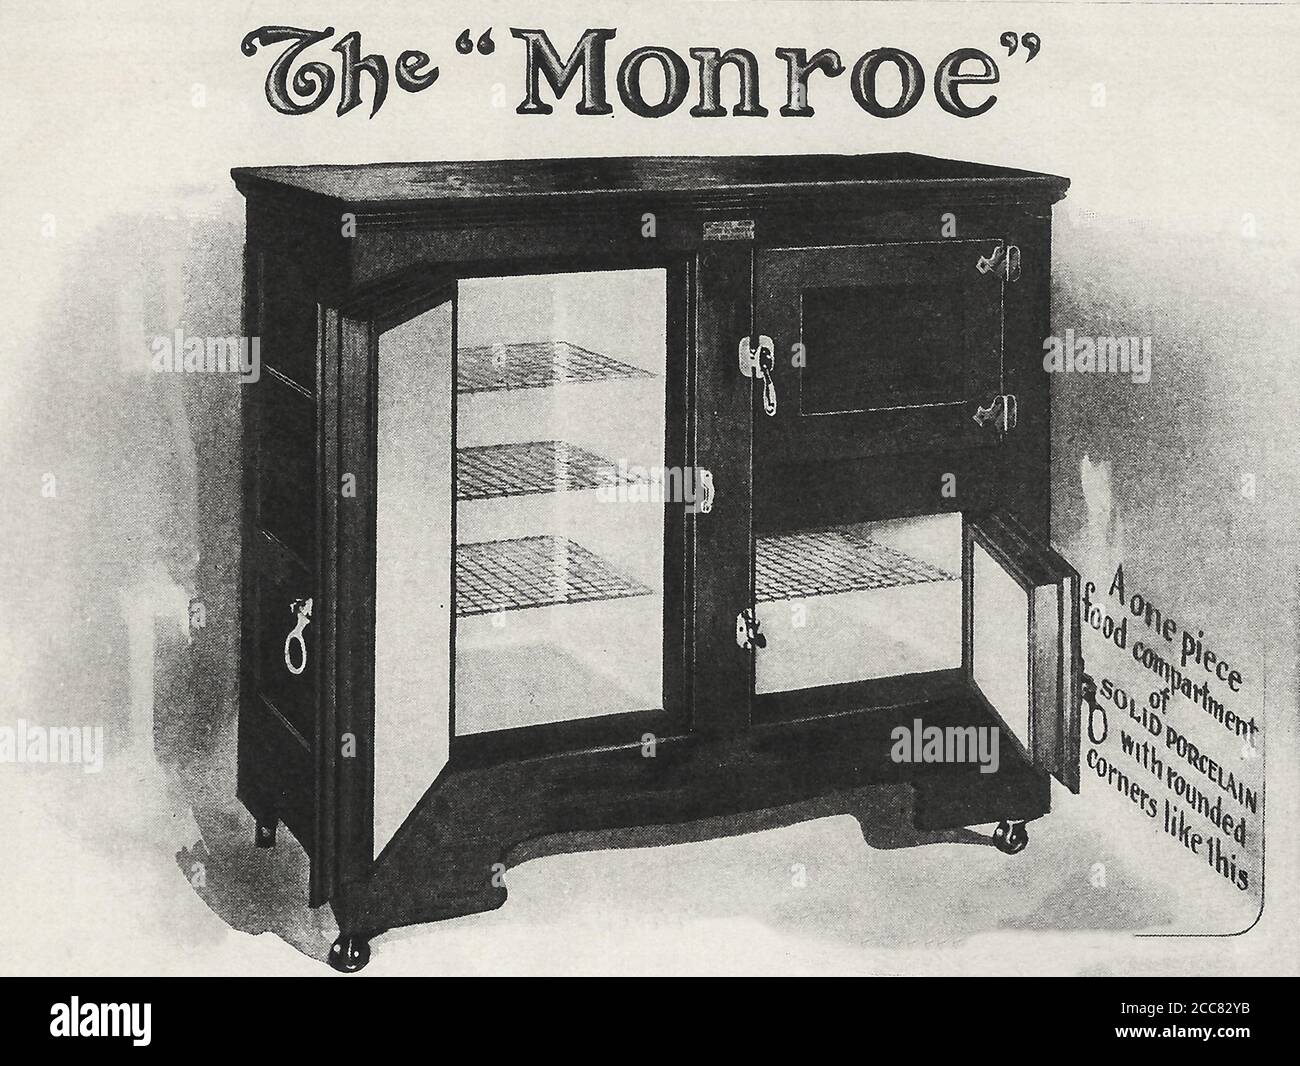 Vintage advertisement for the Monroe Refrigerator Stock Photo